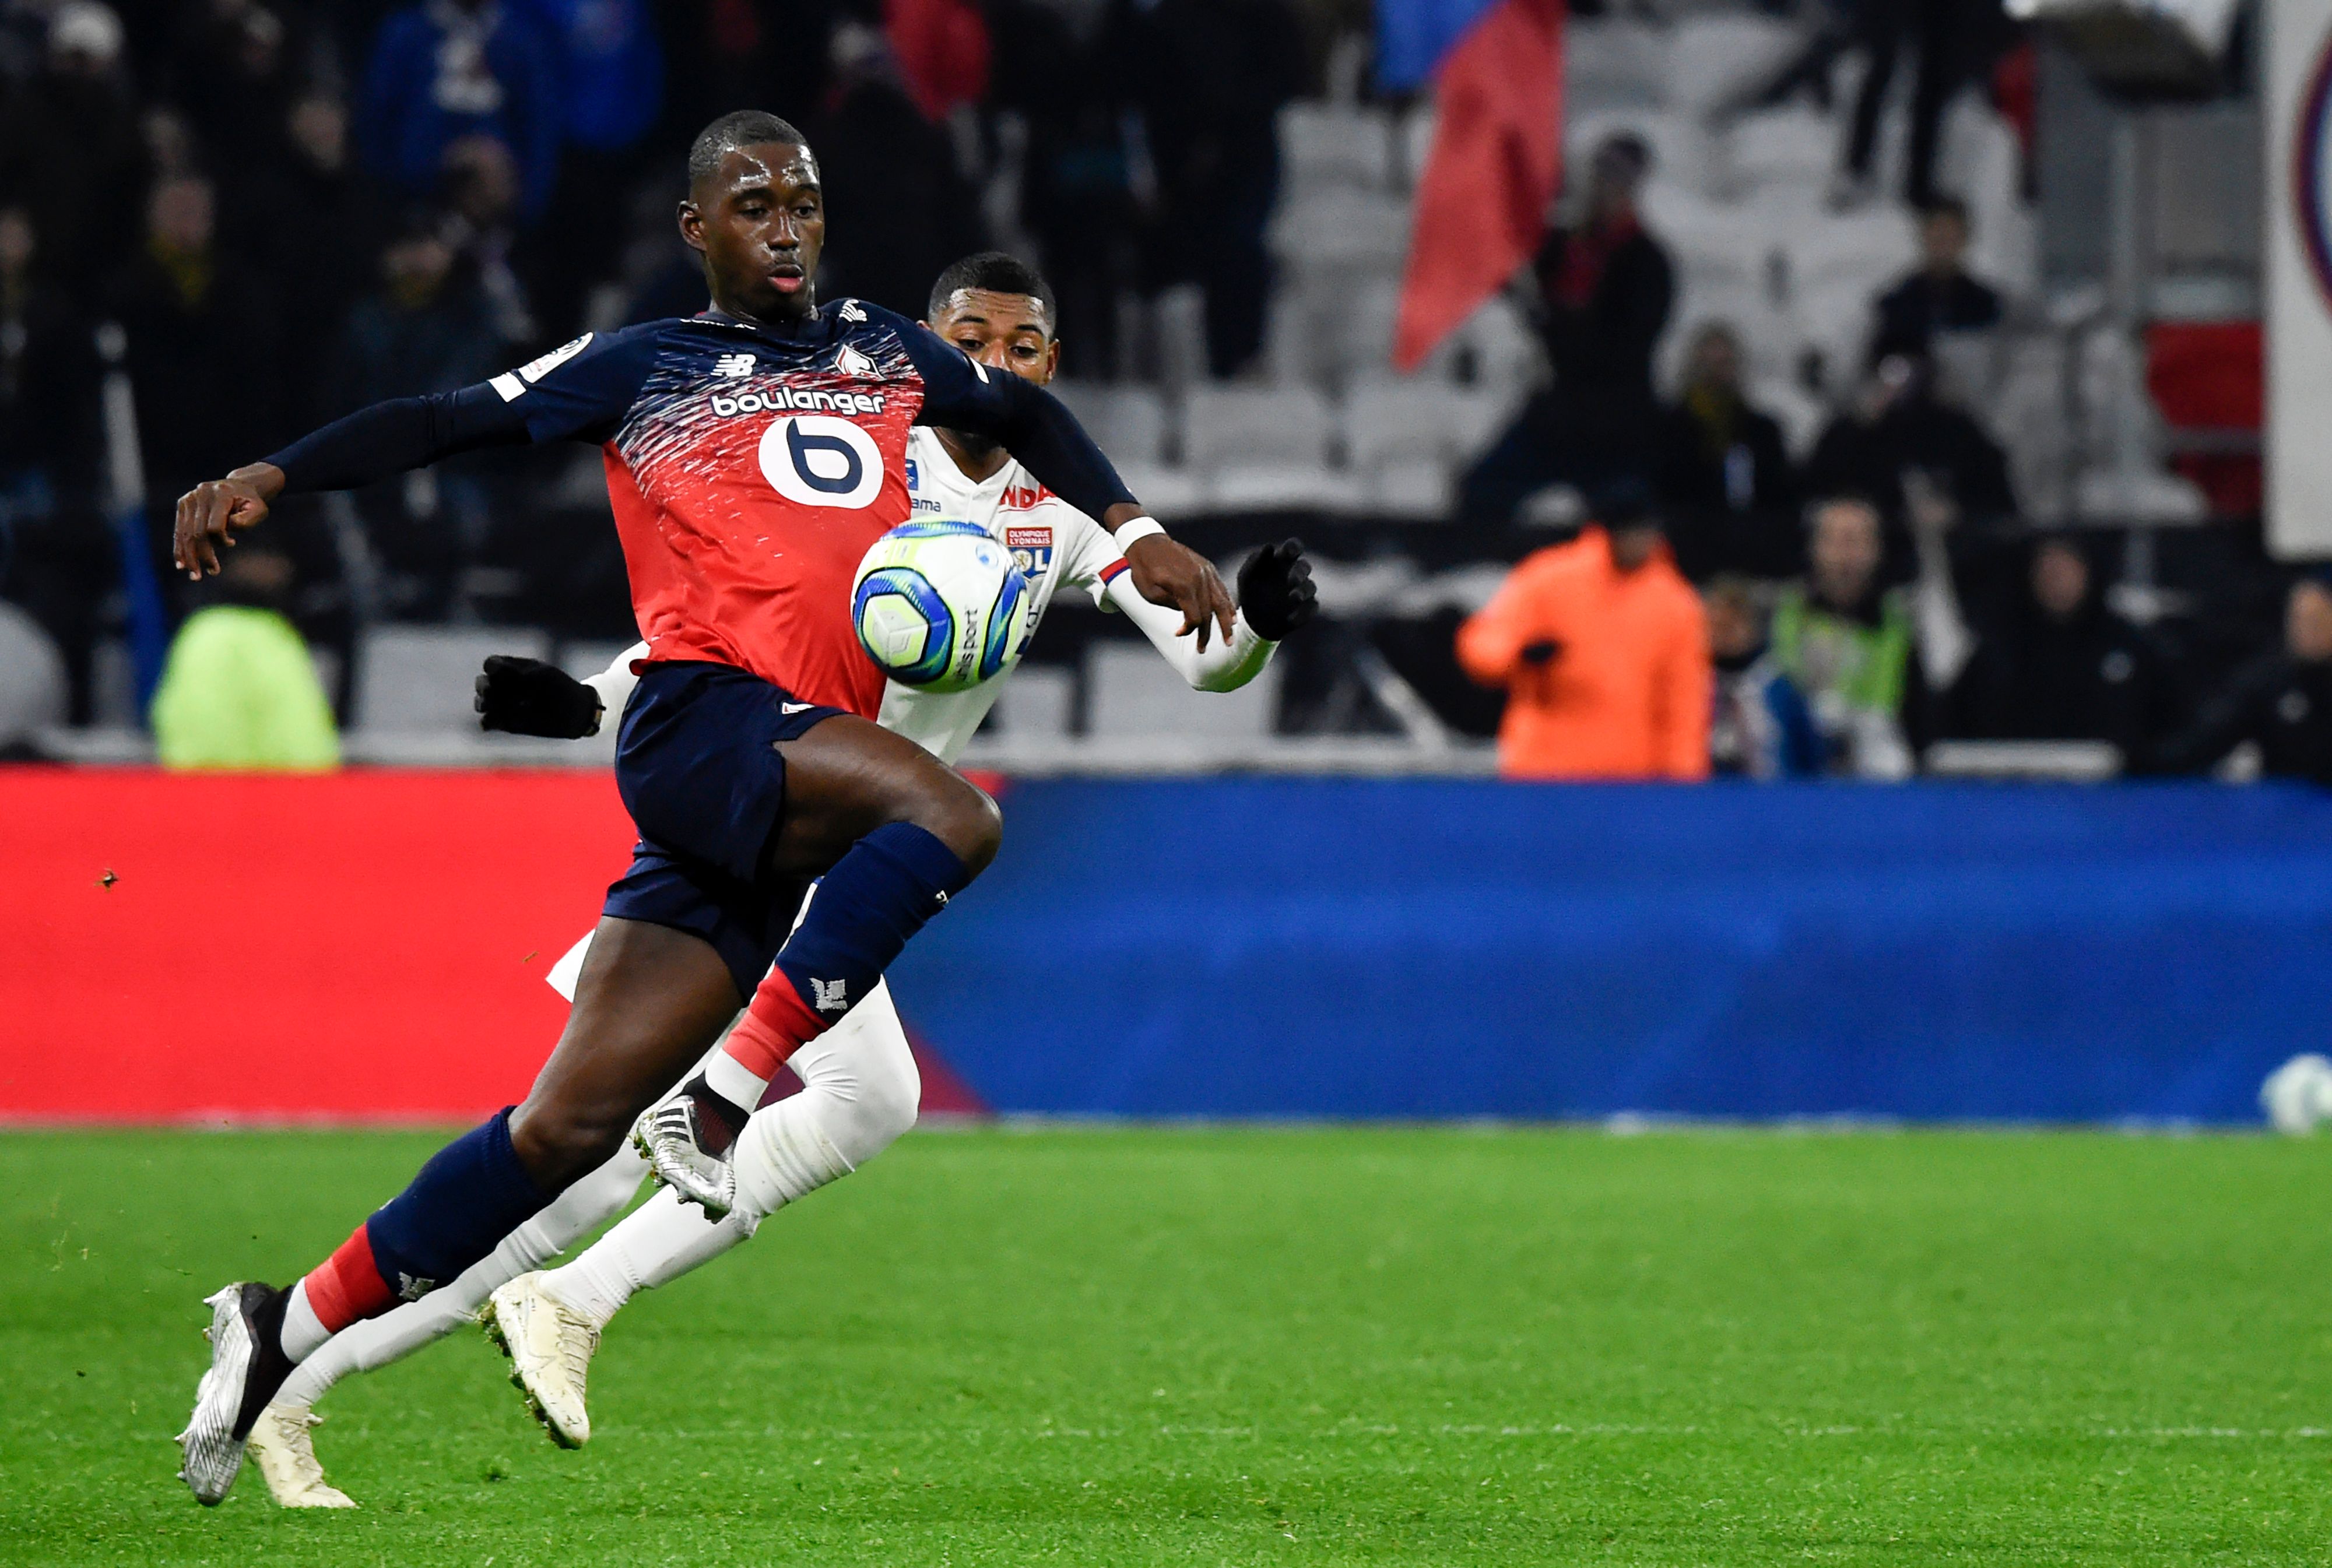 Lille's French midfielder Boubakary Soumare (L) fights for the ball with Lyon's French midfielder Jeff Reine-Adelaide (R) during the French L1 football match between Lyon (OL) and Lille (LOSC) at the Groupama stadium in Decines-Charpieu near Lyon, southeastern France, on December 3, 2019. (Photo by JEAN-PHILIPPE KSIAZEK / AFP) (Photo by JEAN-PHILIPPE KSIAZEK/AFP via Getty Images)